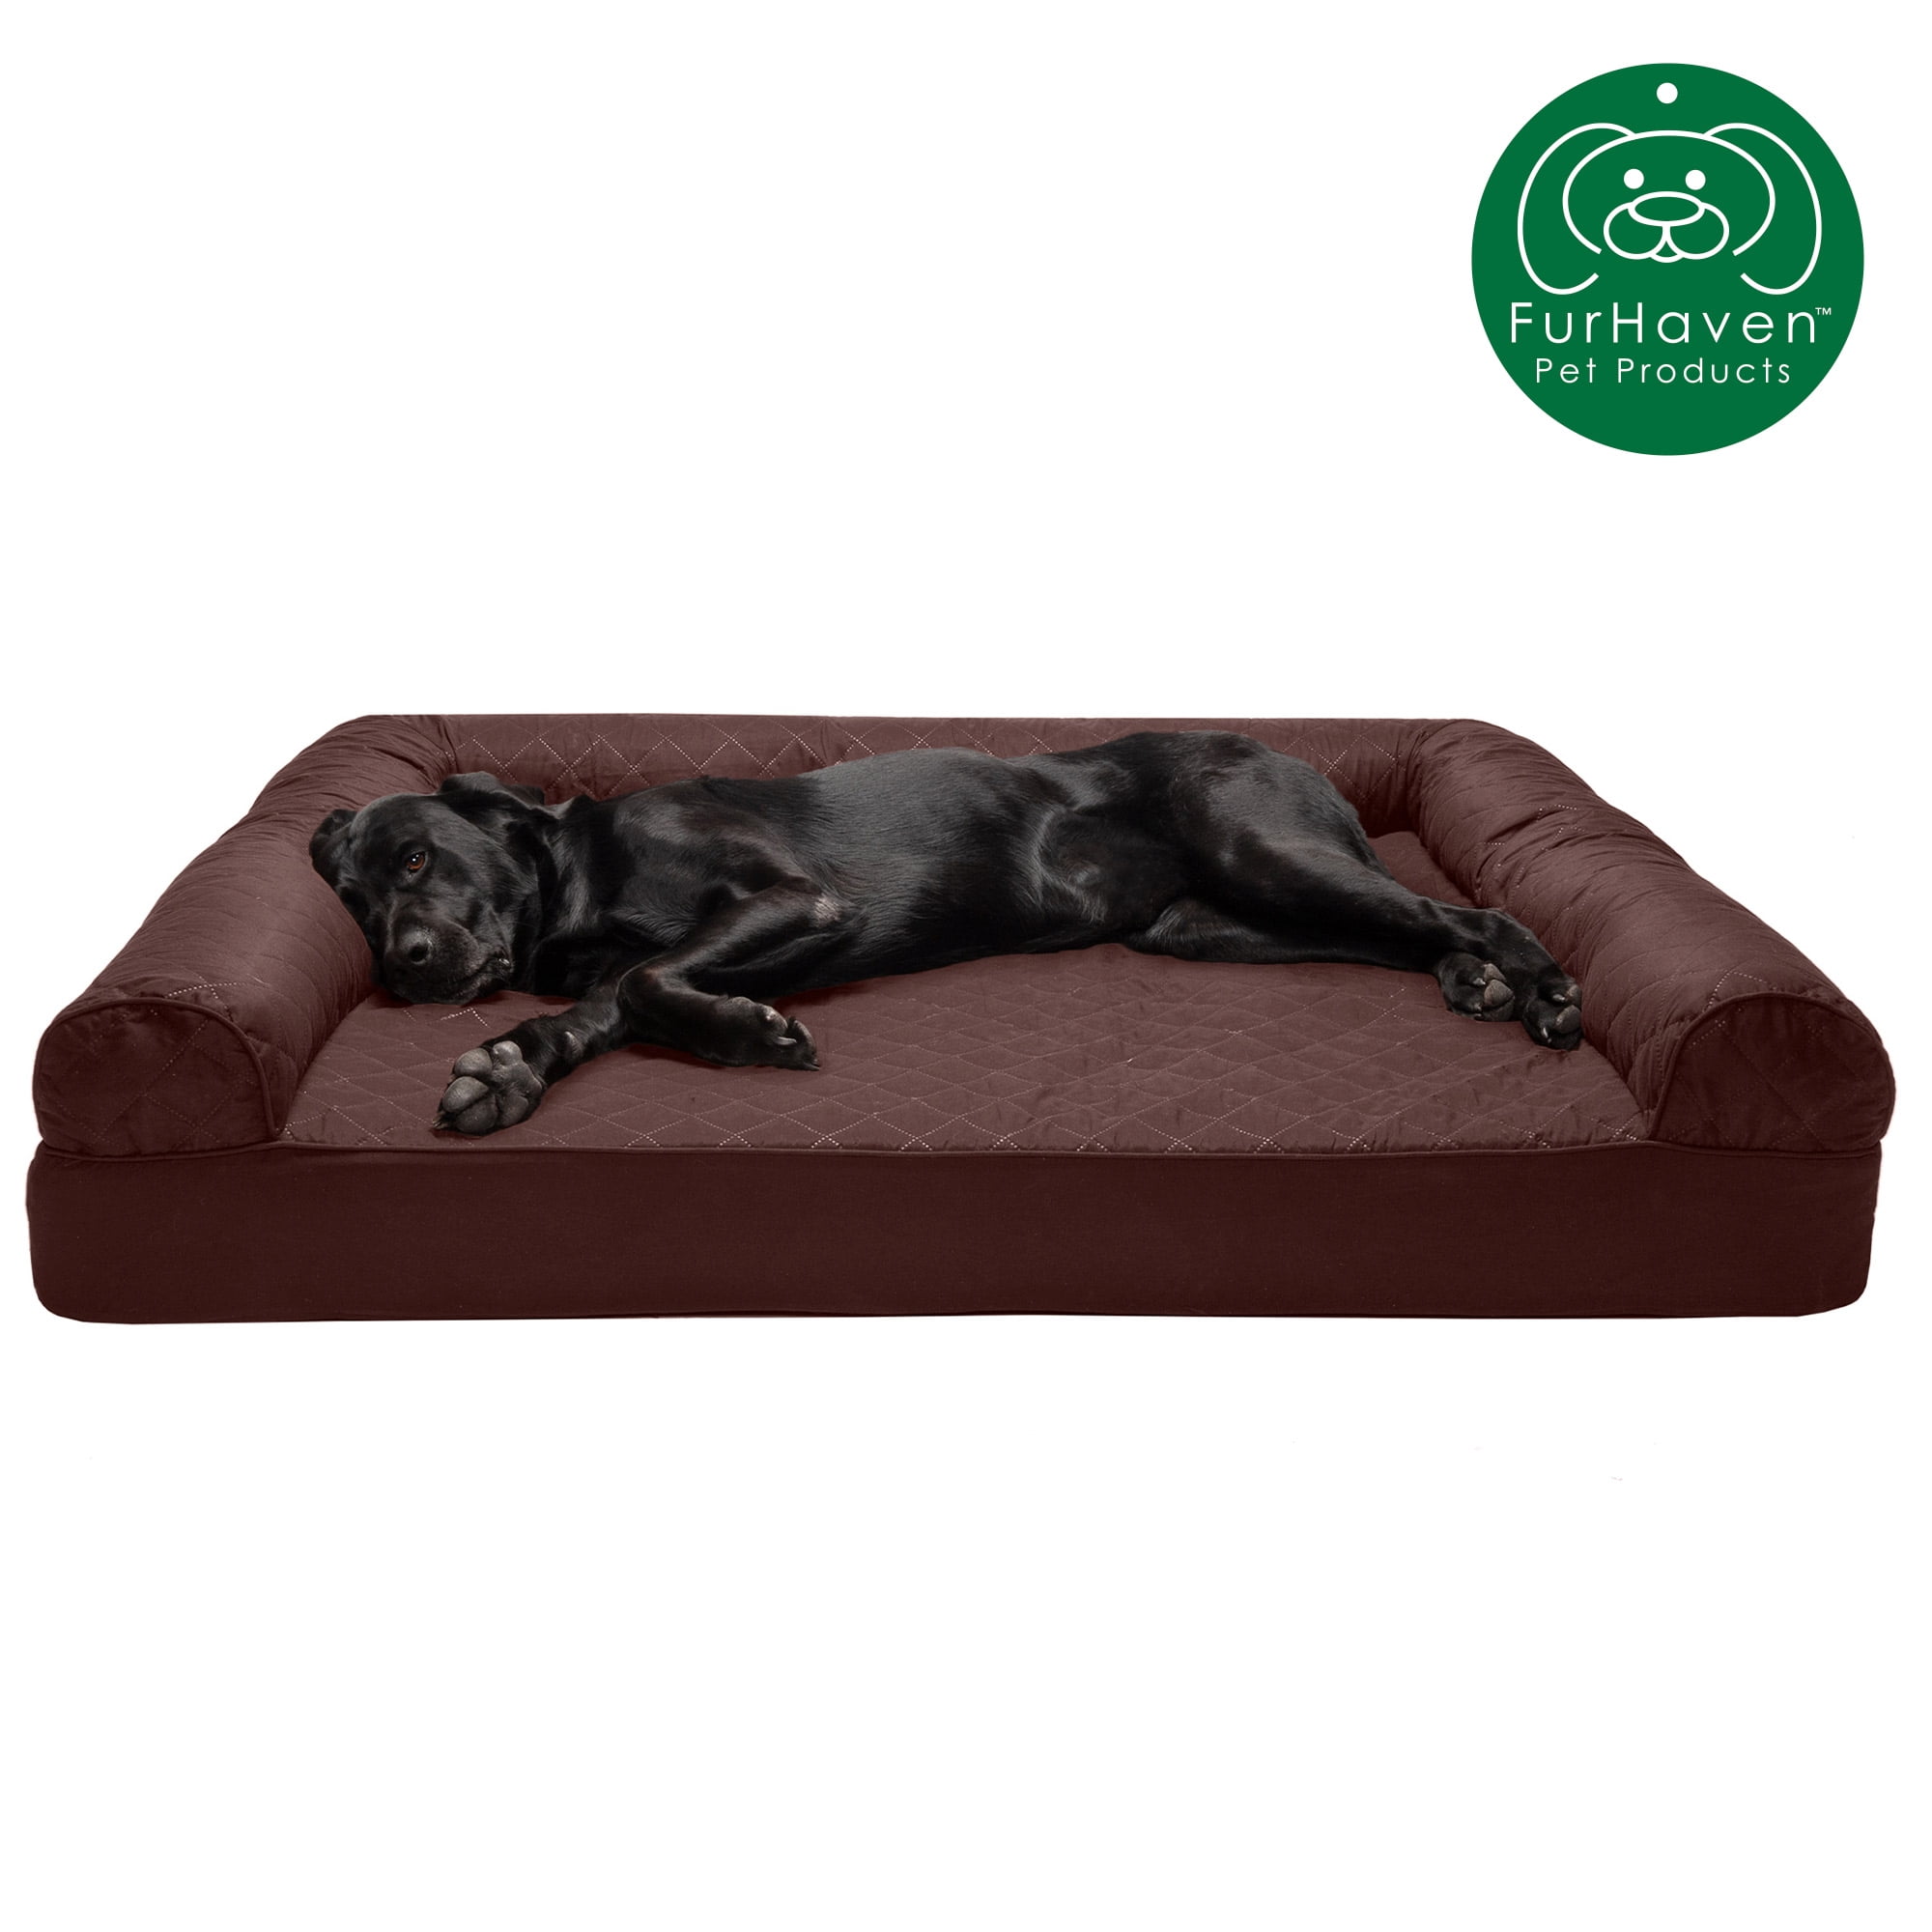 Coffee Jumbo Furhaven Pet Dog Bed Orthopedic Quilted Sofa-Style Living Room Couch Pet Bed for Dogs & Cats 